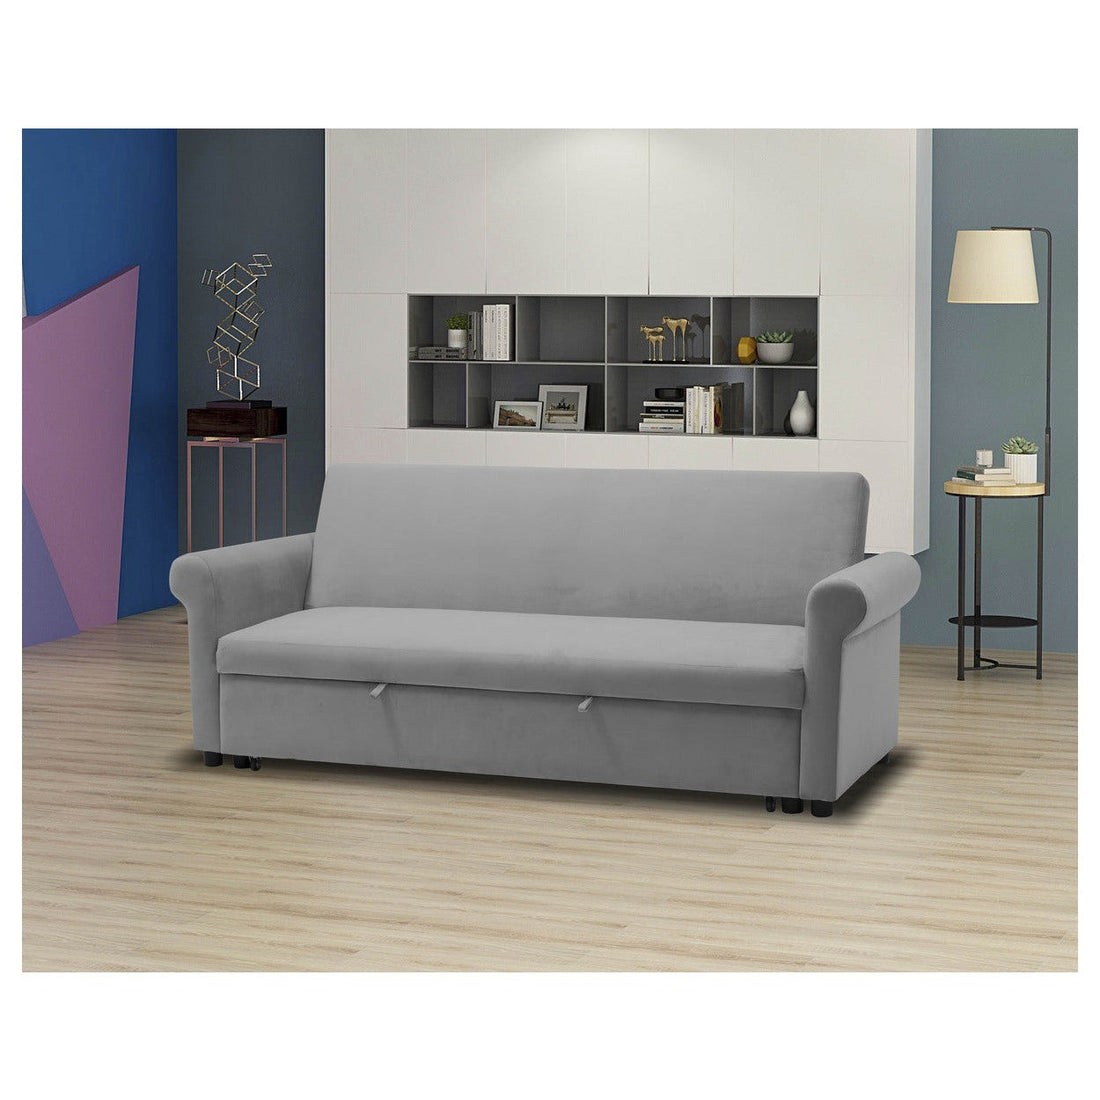 (2) SOFA BED, GRAY HM3850GY*